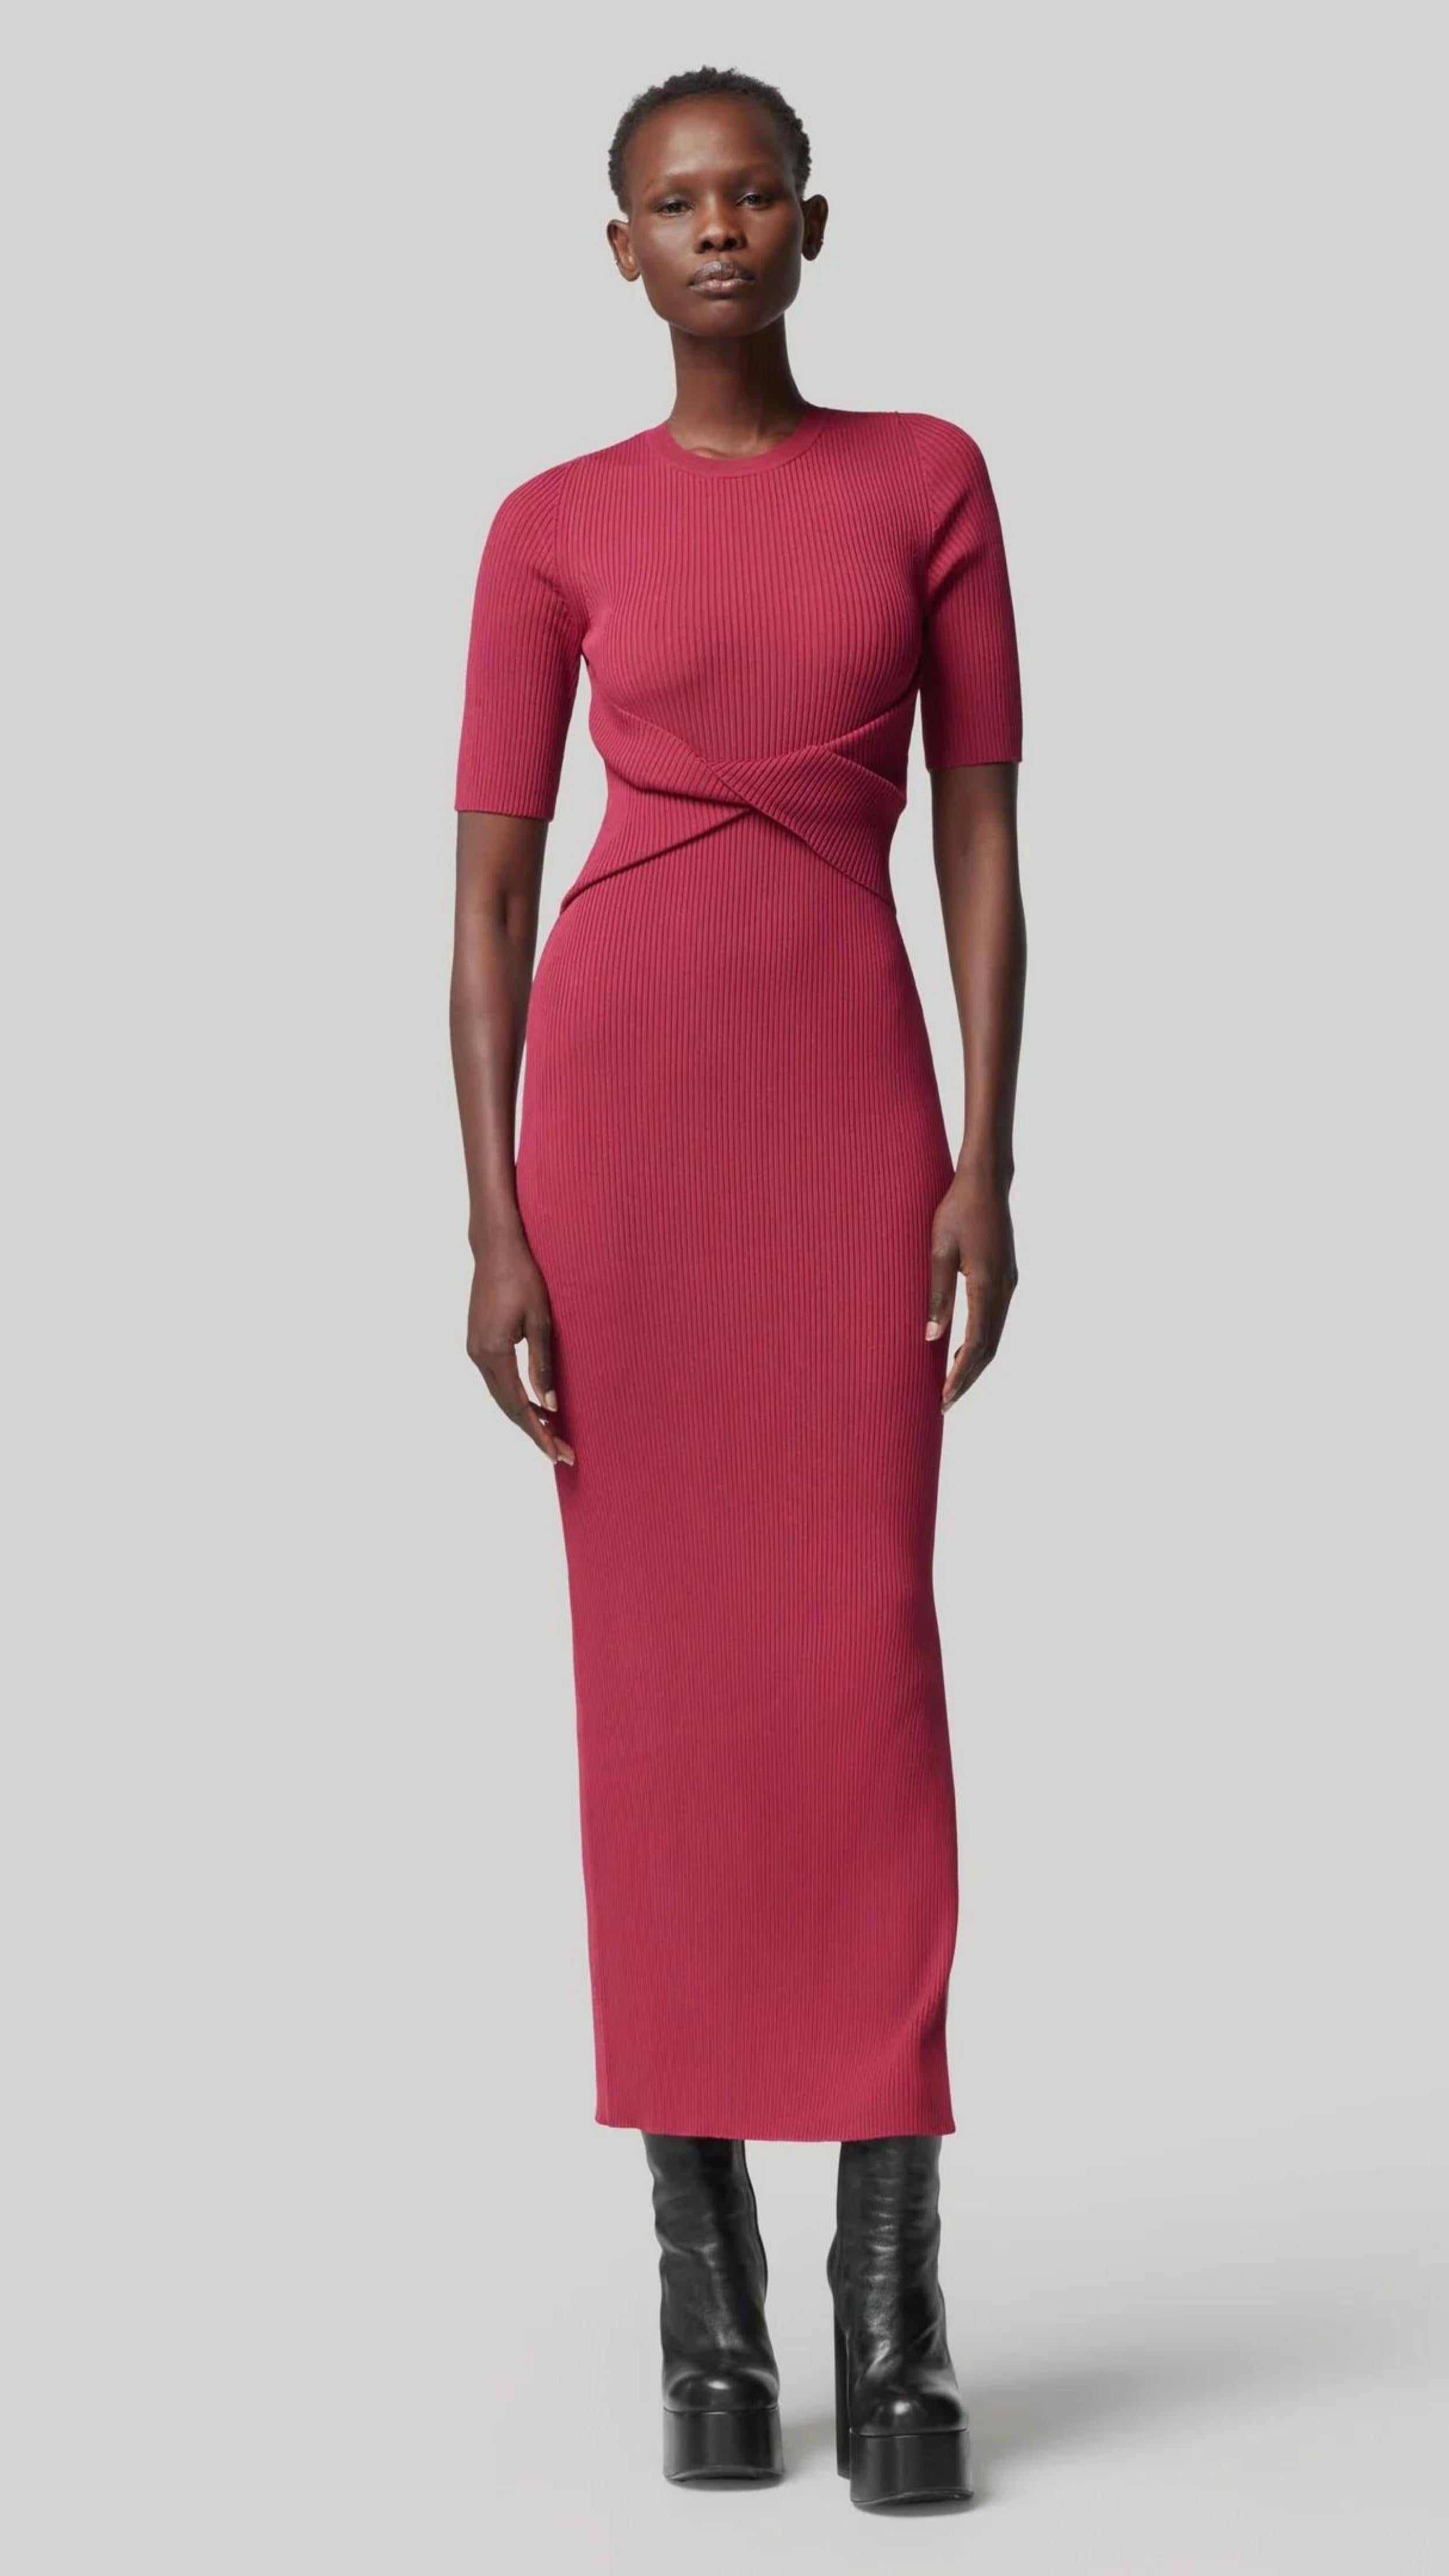 Altruzarra, Argolis Dress. Rose pink colored ribbed knit dress. Body hugging with flattering, slimming from waist detail. It has a rounded collar, half short sleeves and midid length. There are two side slits to the knee. Shown on model facing front. Available at experience 27 in madrid spain.